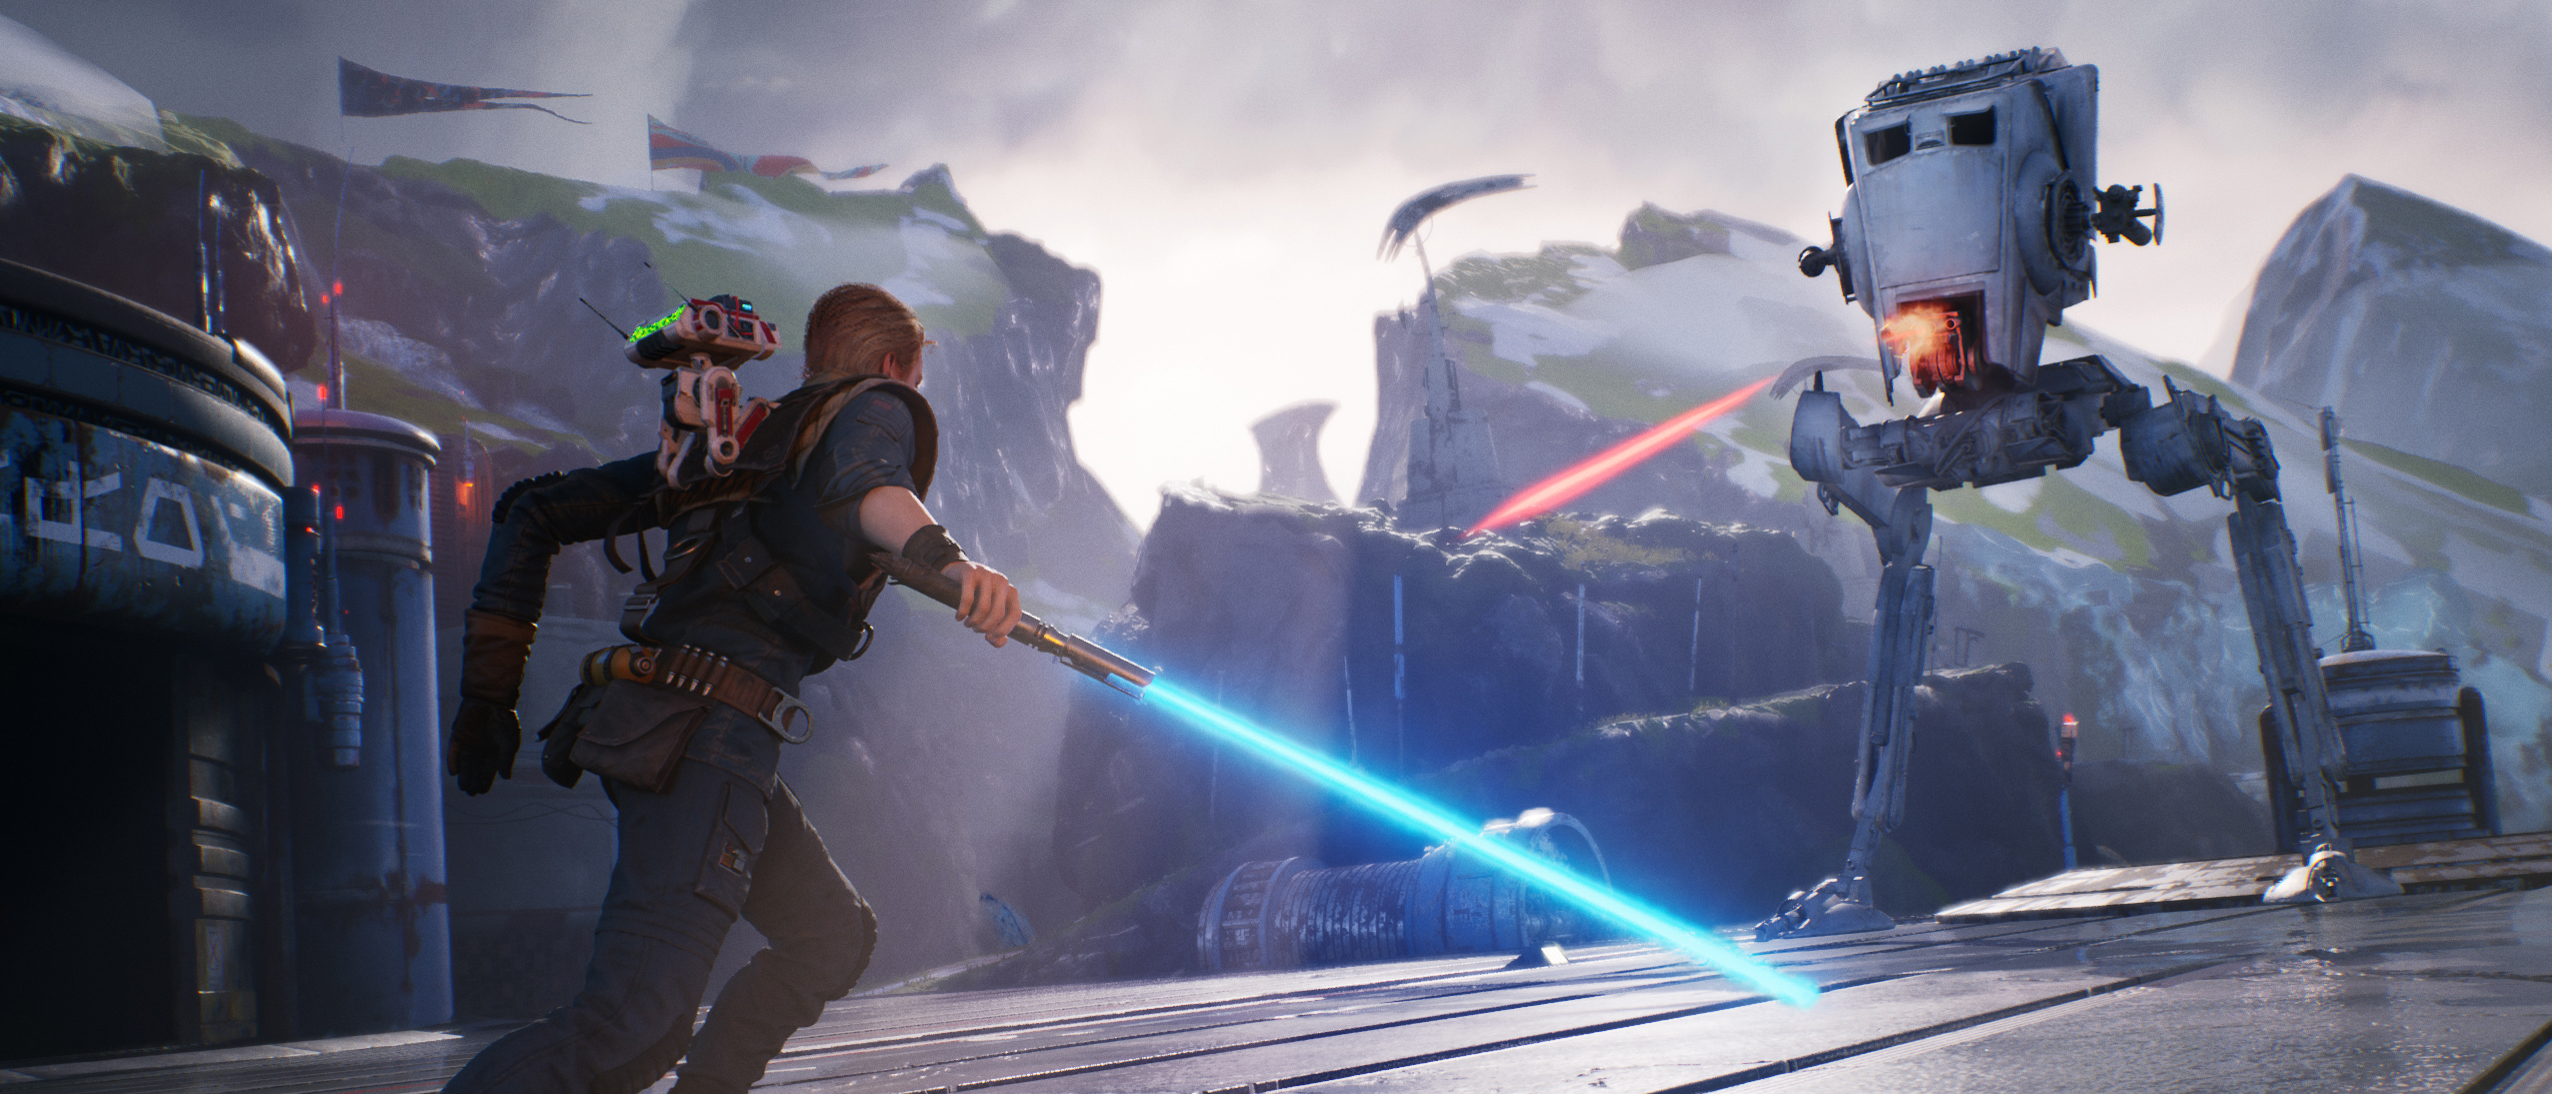 Star Wars Jedi: Fallen Order Review - New EA/Respawn Game Is Hard